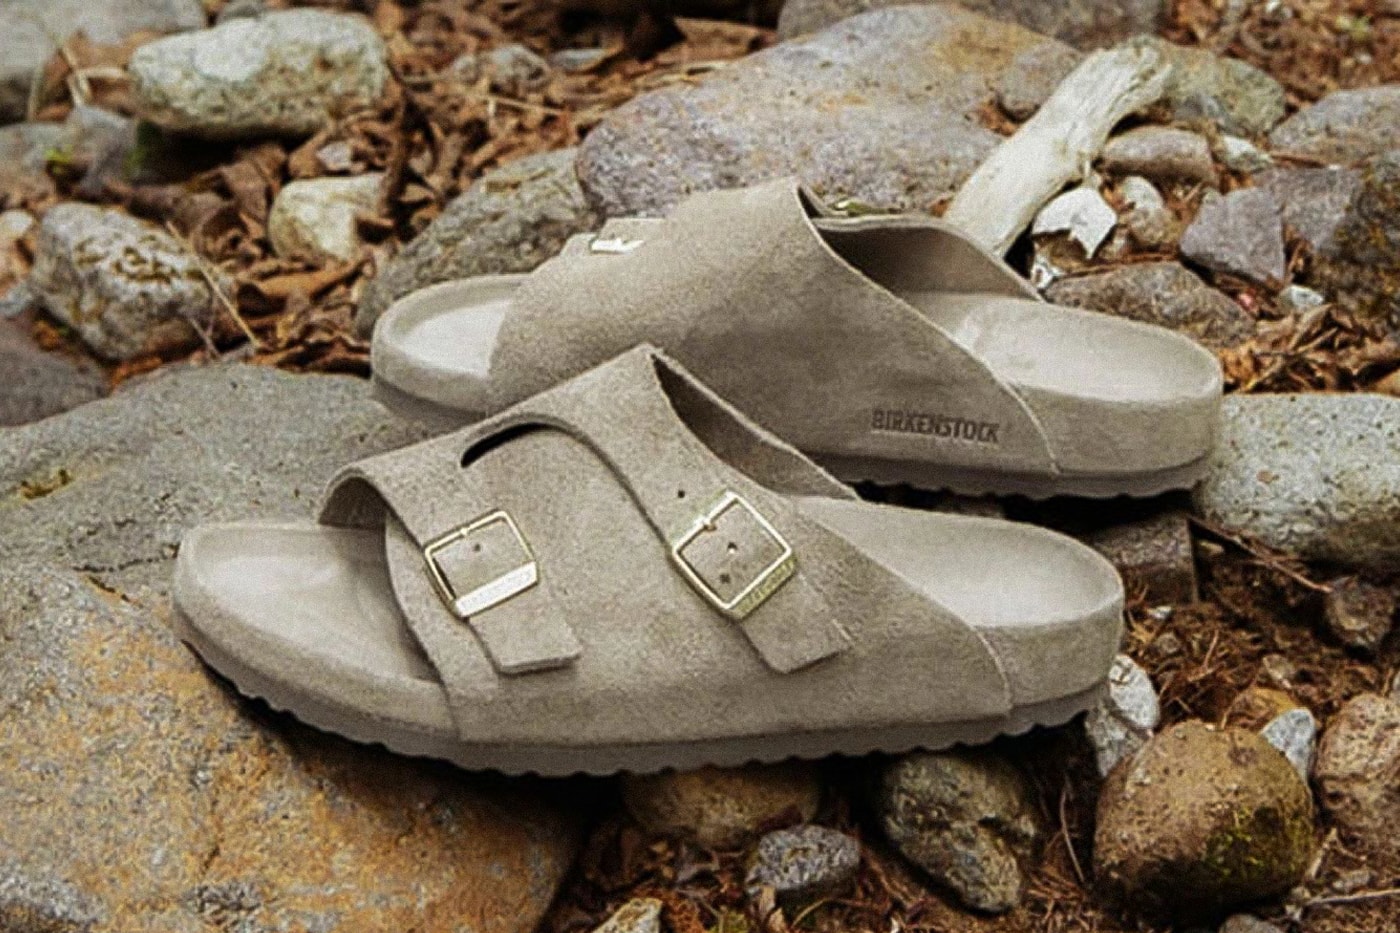 Birkenstock Has Filed for an IPO announcement clogs oliver reichert sandals l catteron